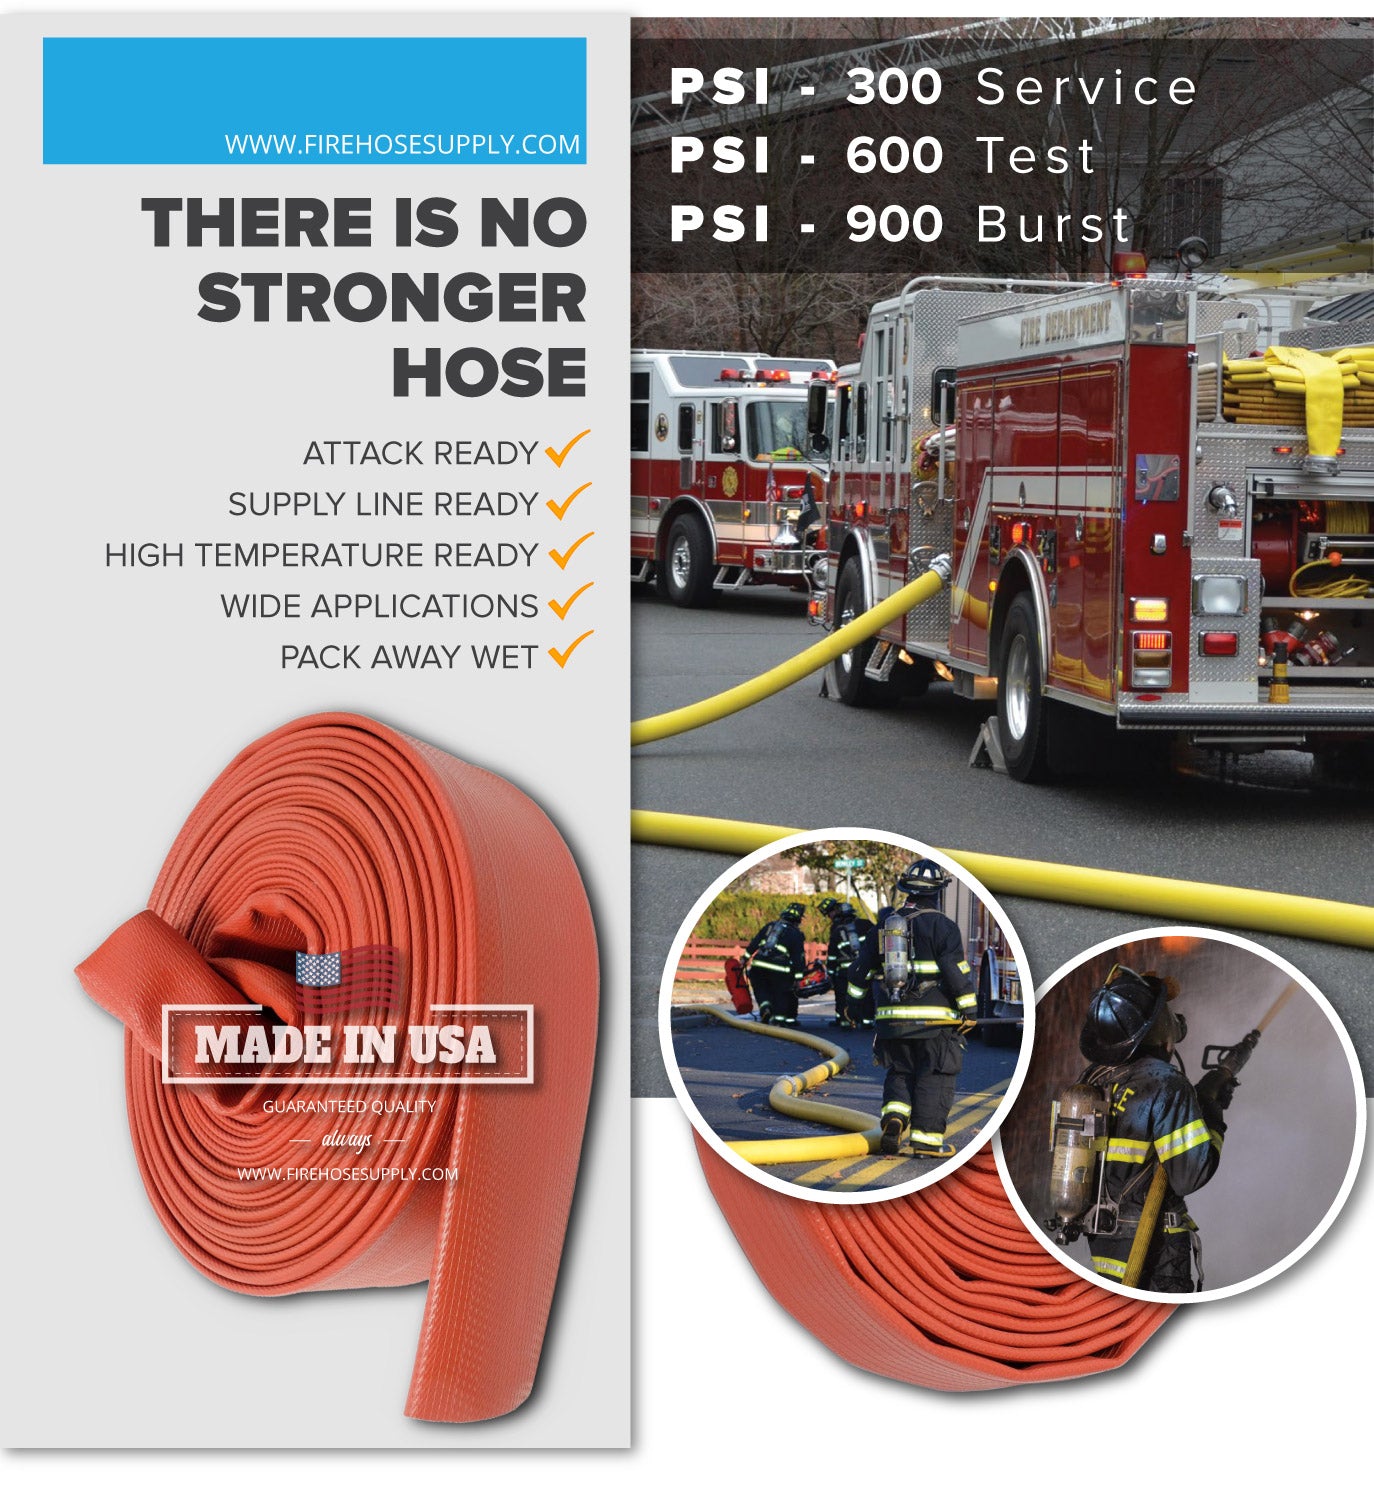 3 Inch Rubber Fire Hose Material Only Supply And Attack Ready Firefighter Red 600 PSI Test